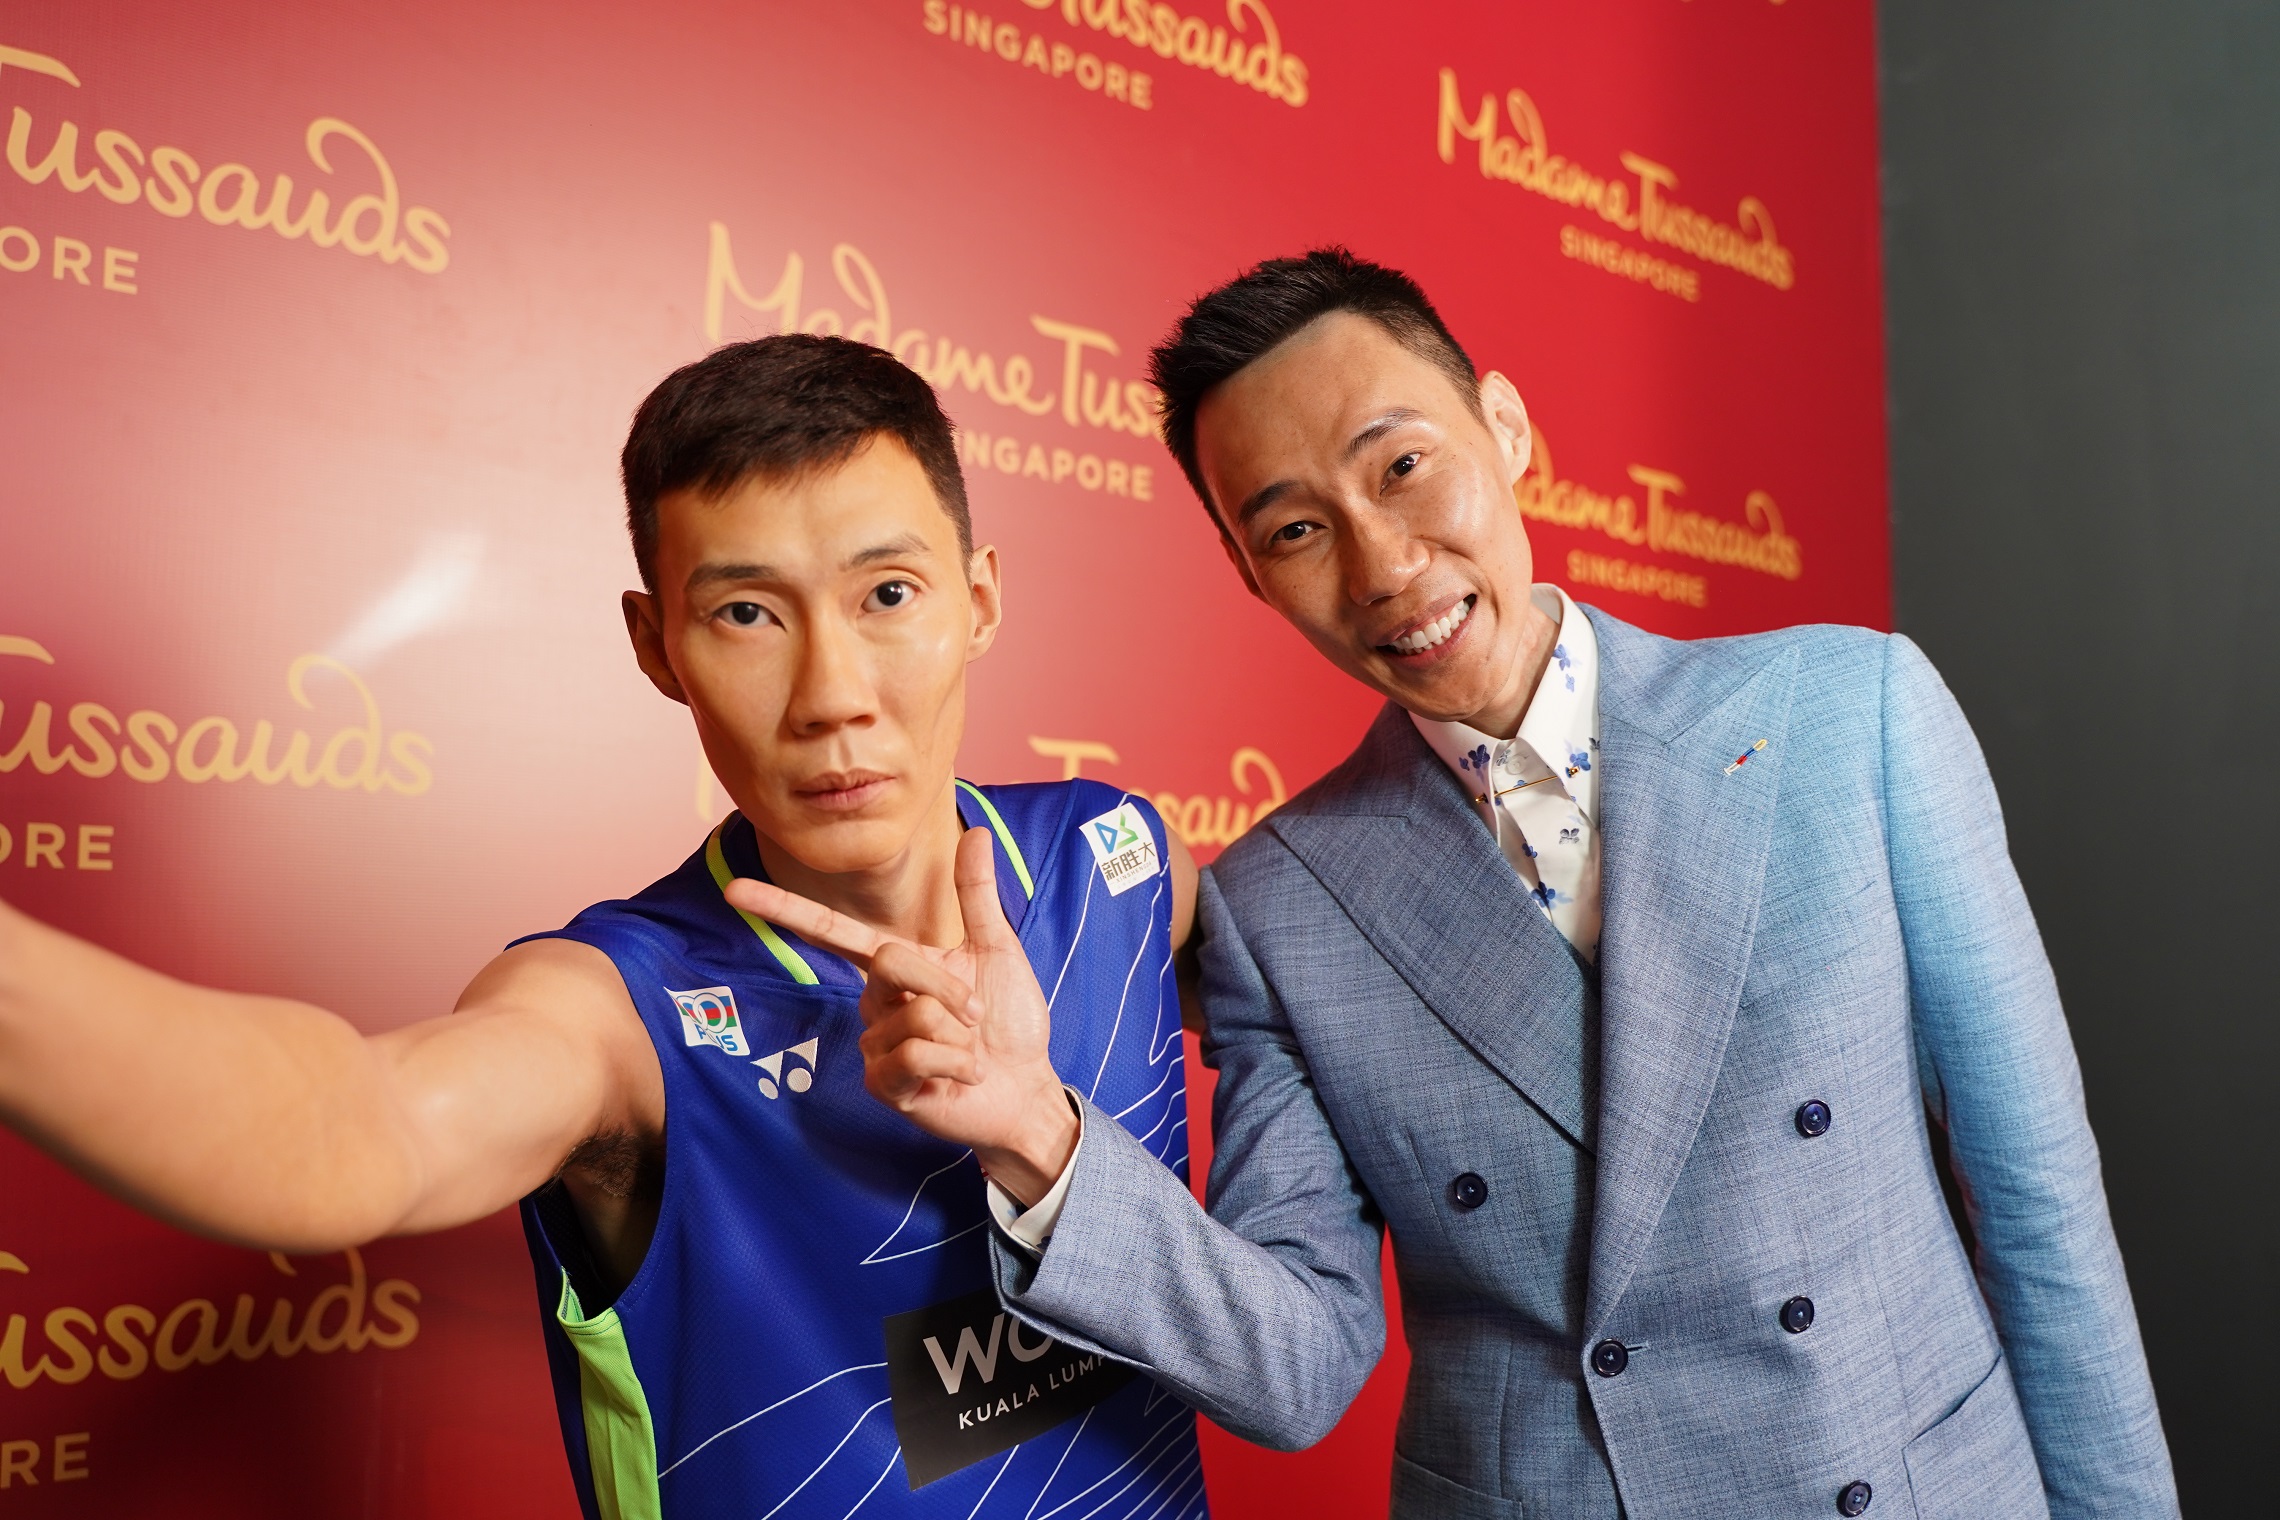 Datuk Lee Chong Wei standing next to his waxwork statue at Madame Tussauds. Image credit: Provided to WauPost